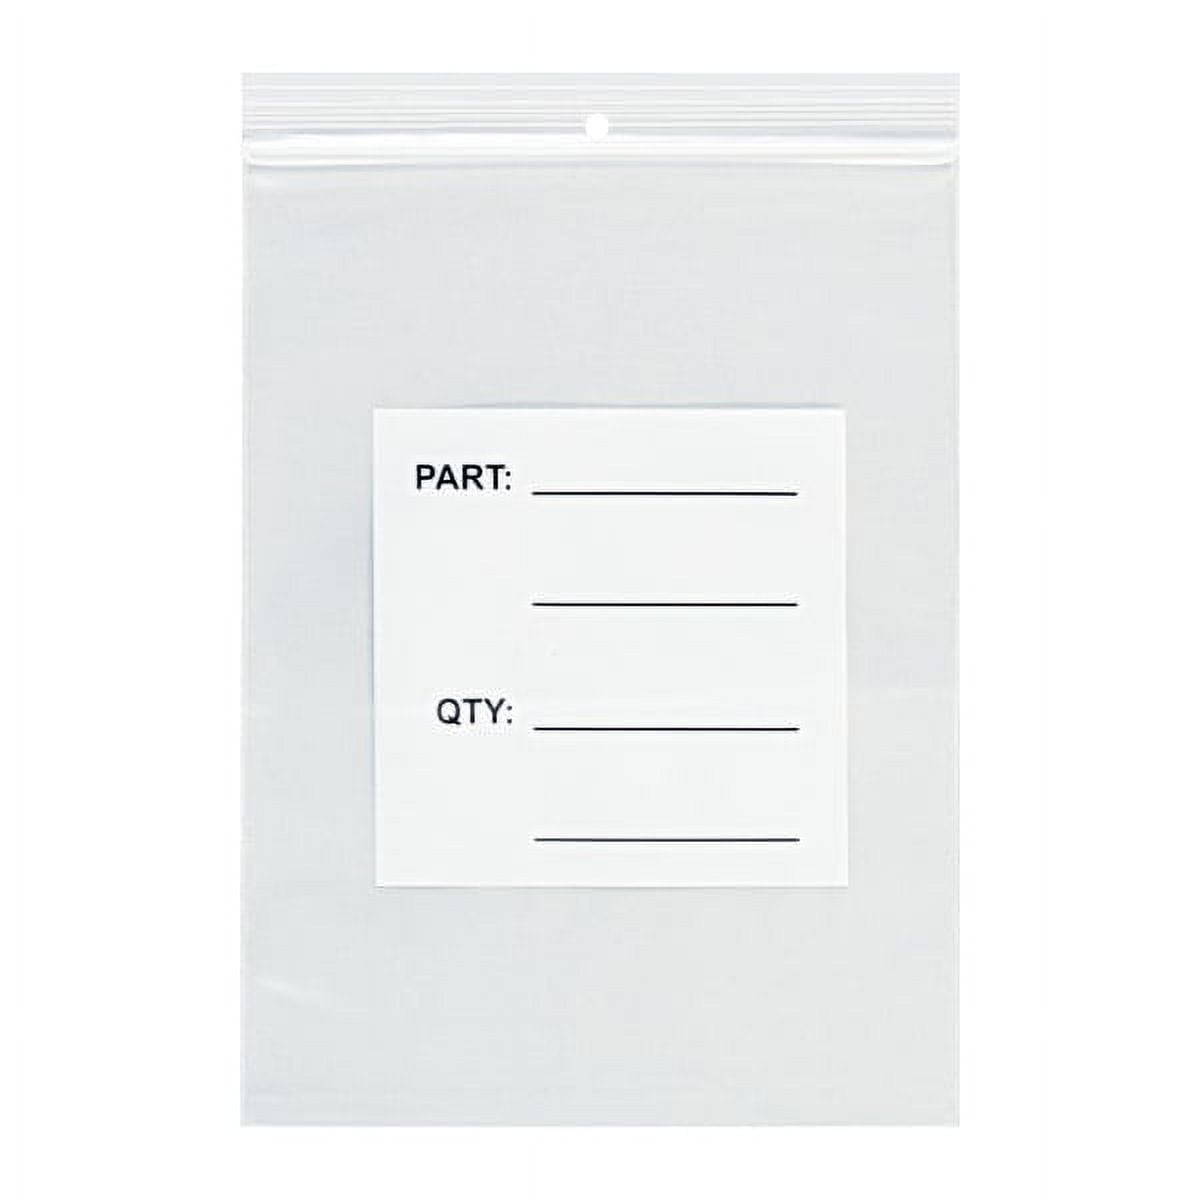 Pb12002 3 X 4 In. 4 Mil Parts Bags With Hang Holes - Pack Of 1000